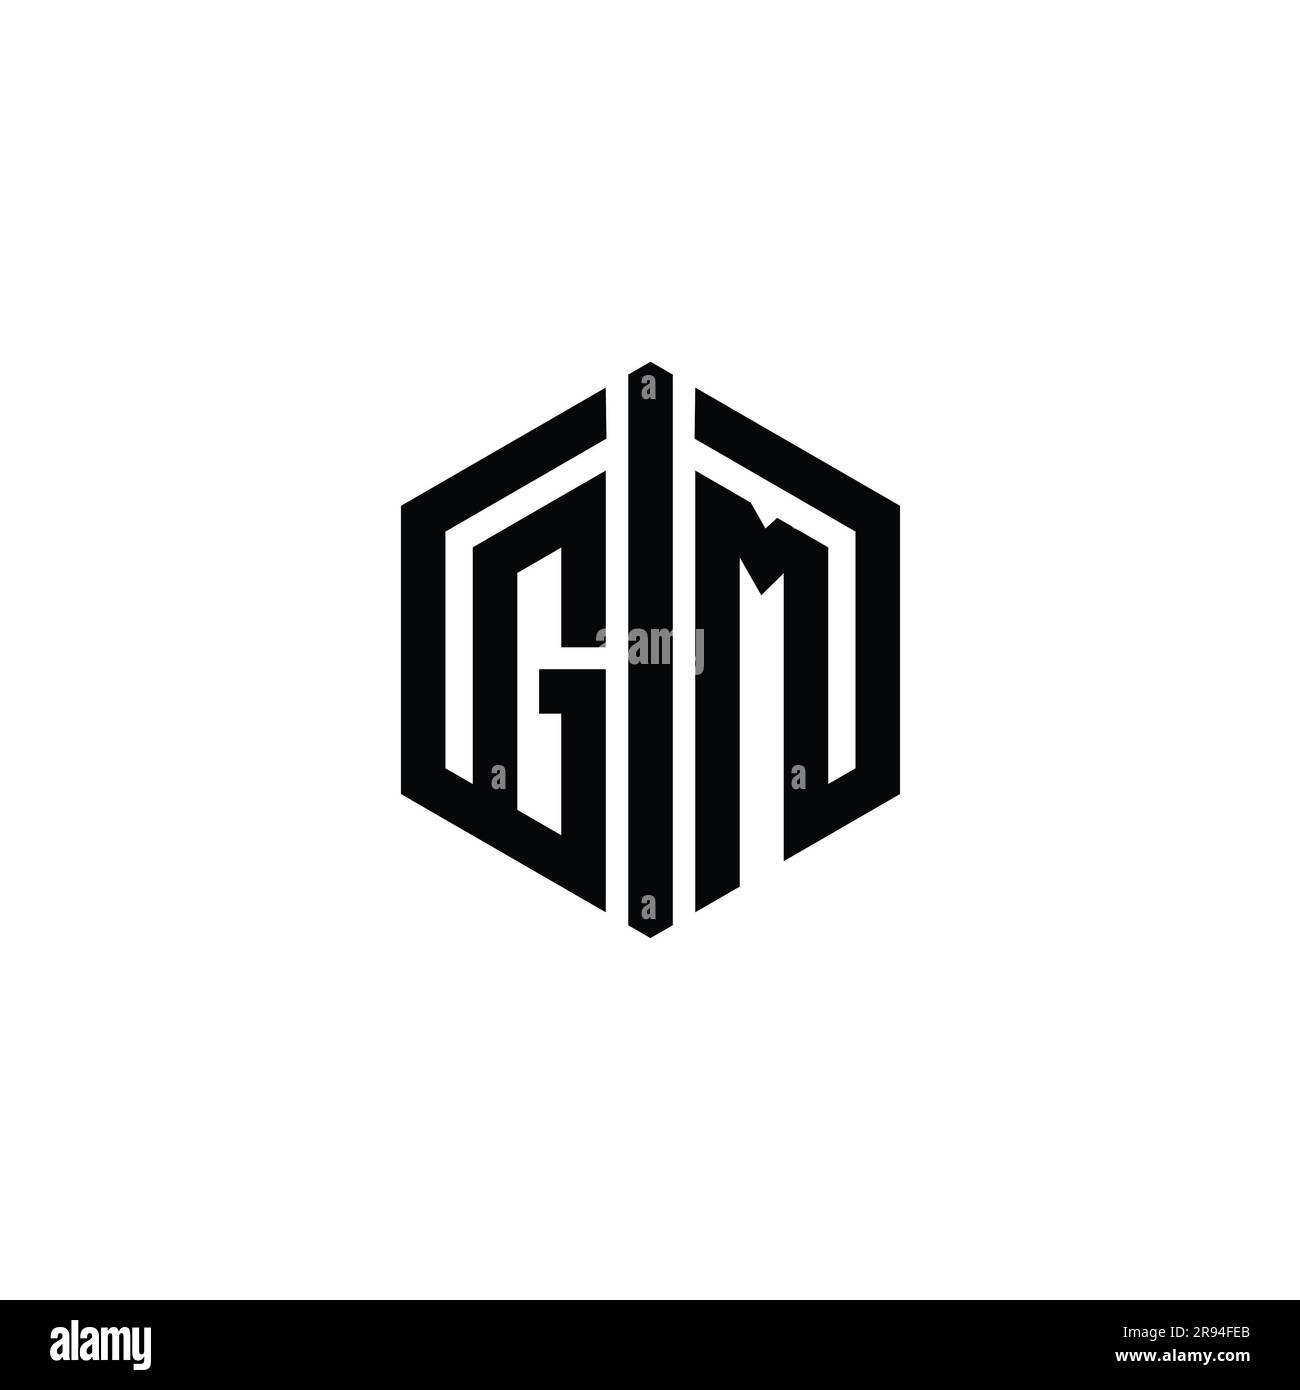 Gm letter hi-res stock photography and images - Alamy